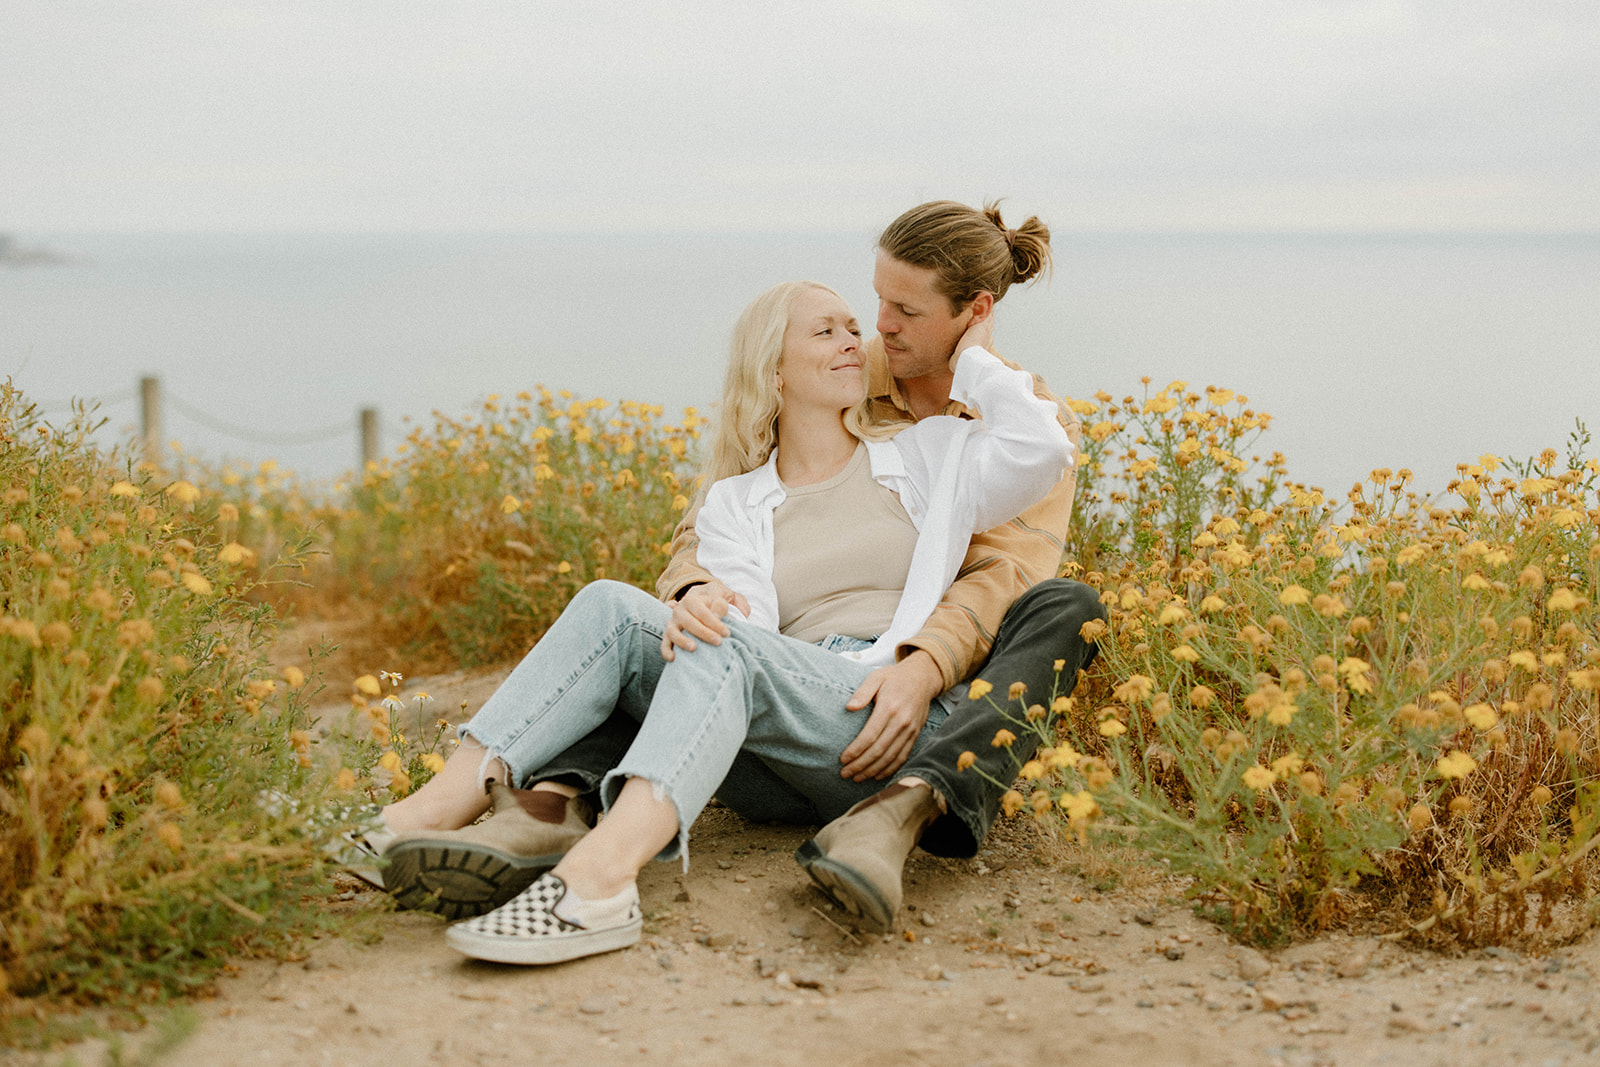 Couples photo session on the cliffs in La Jolla San Diego California